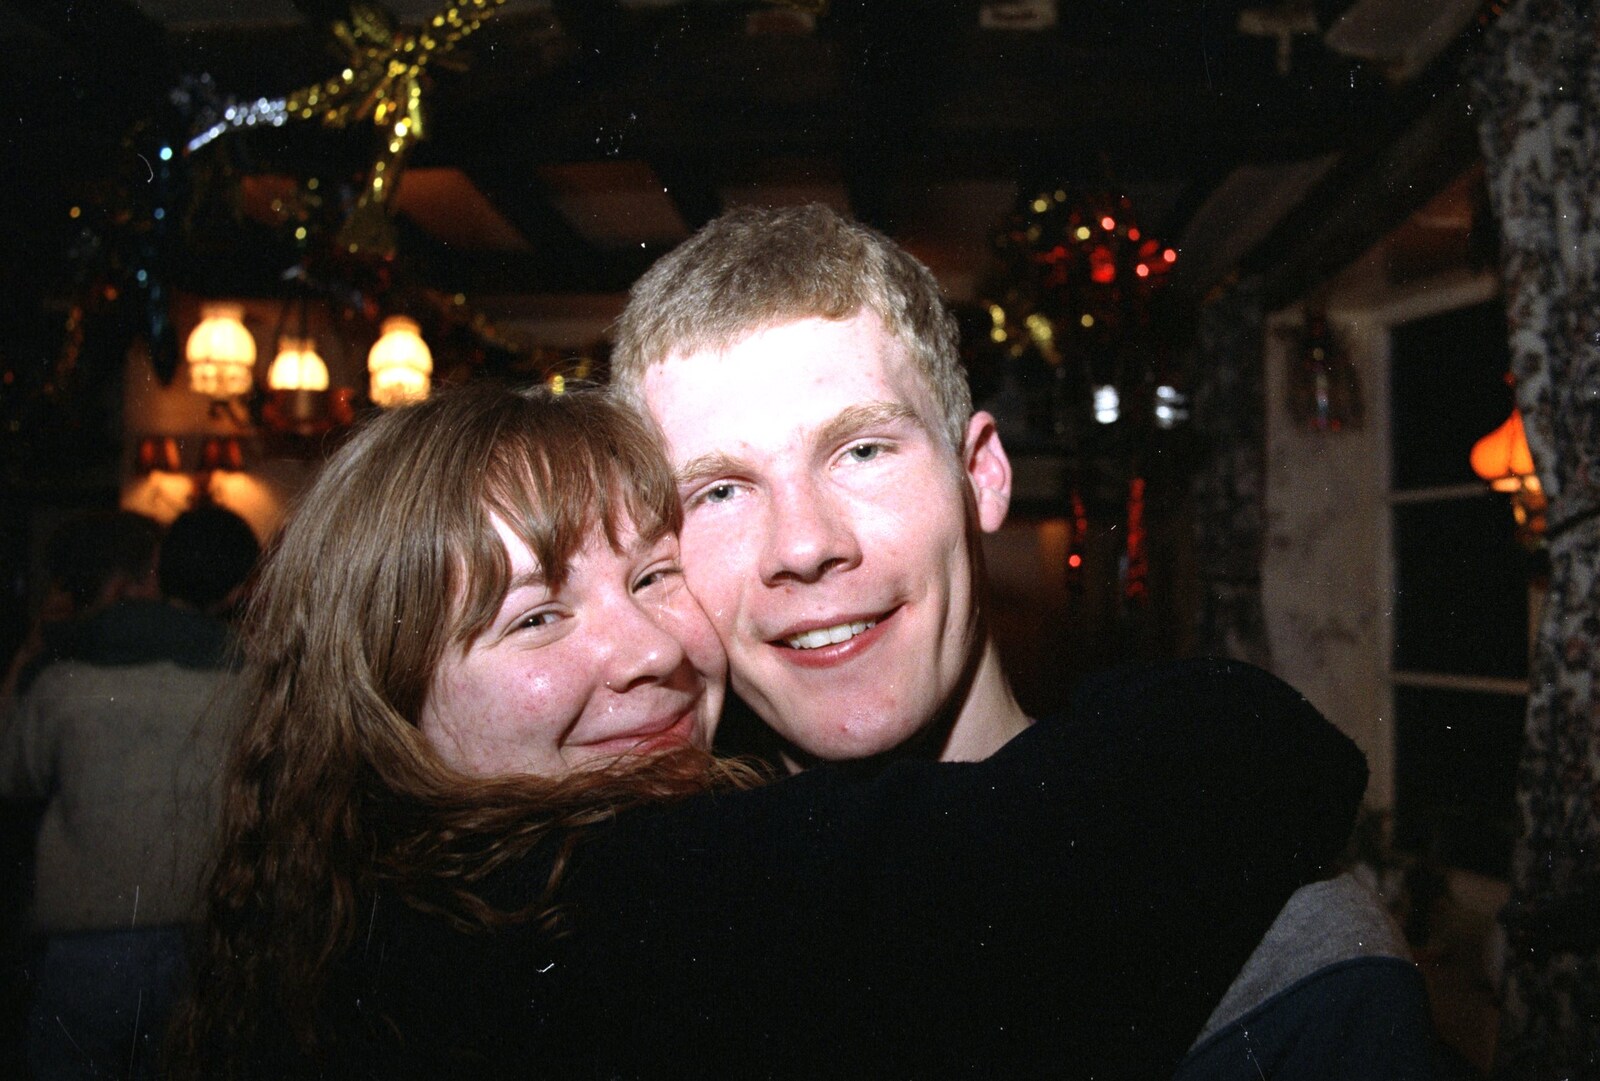 Jackie and Andy from New Year's Eve at the Swan Inn, Brome, Suffolk - 31st December 1994